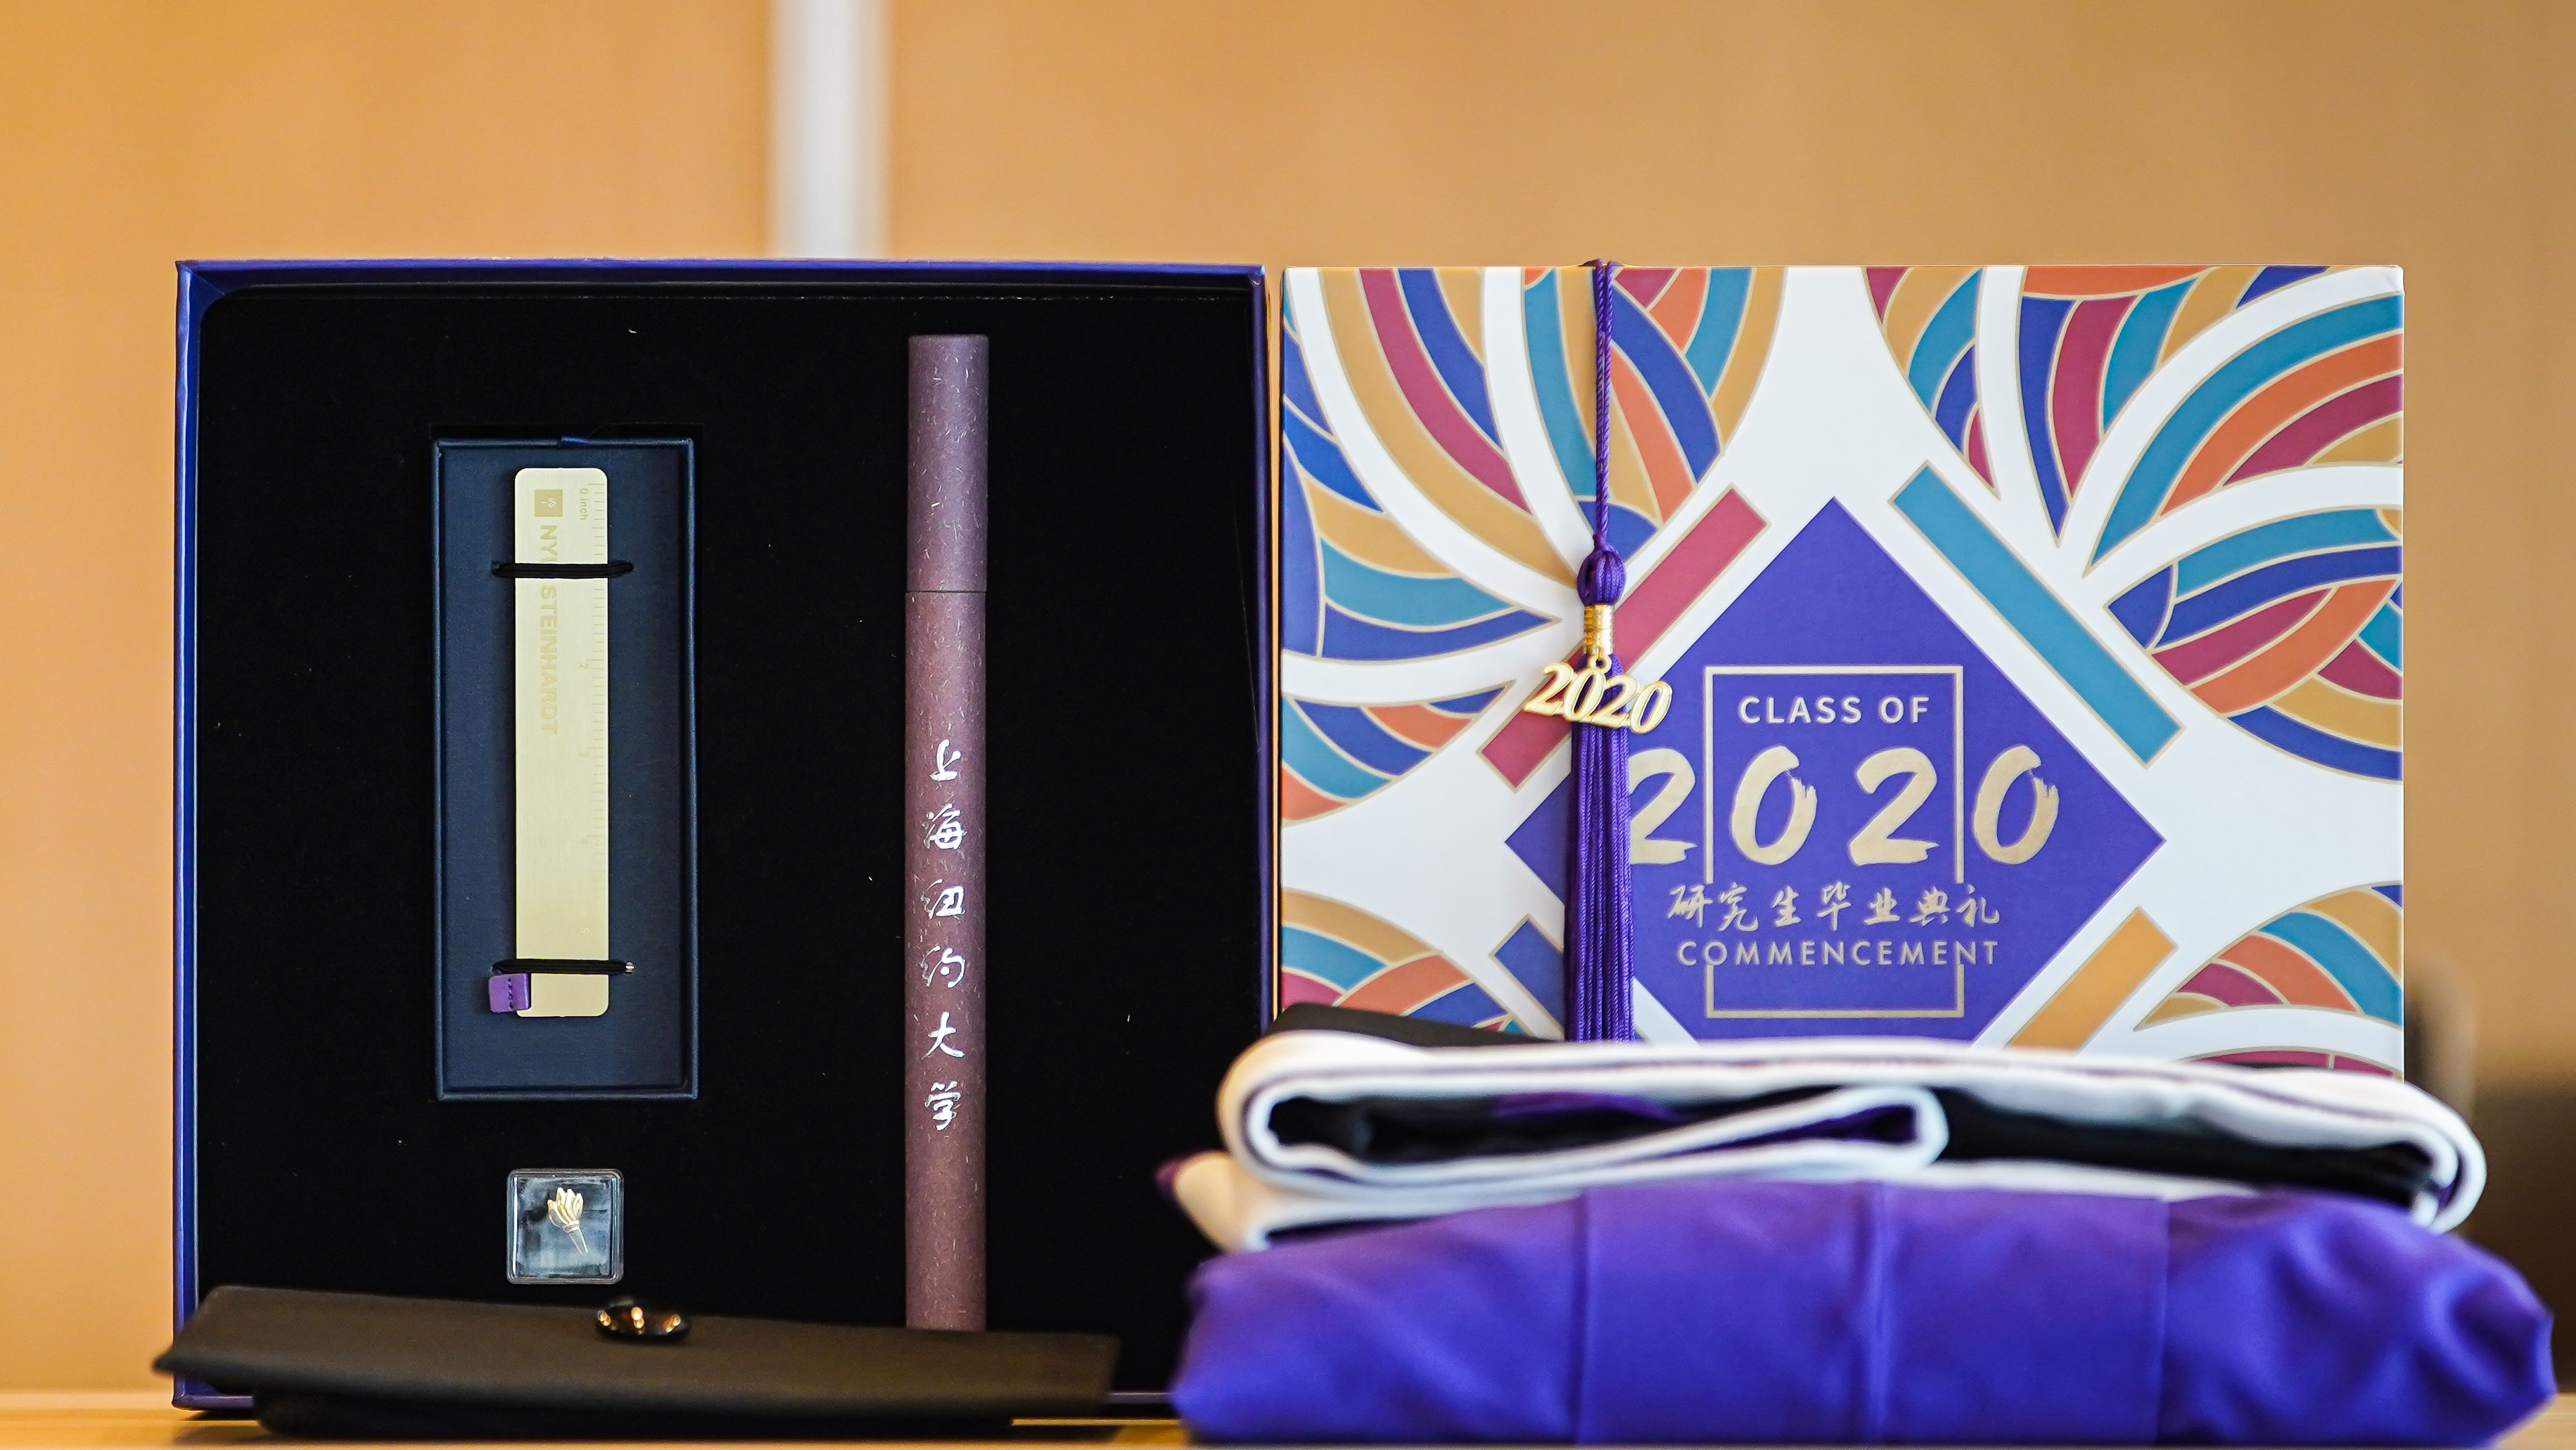 Class of 2020 Commencement commemorative box open to reveal contents